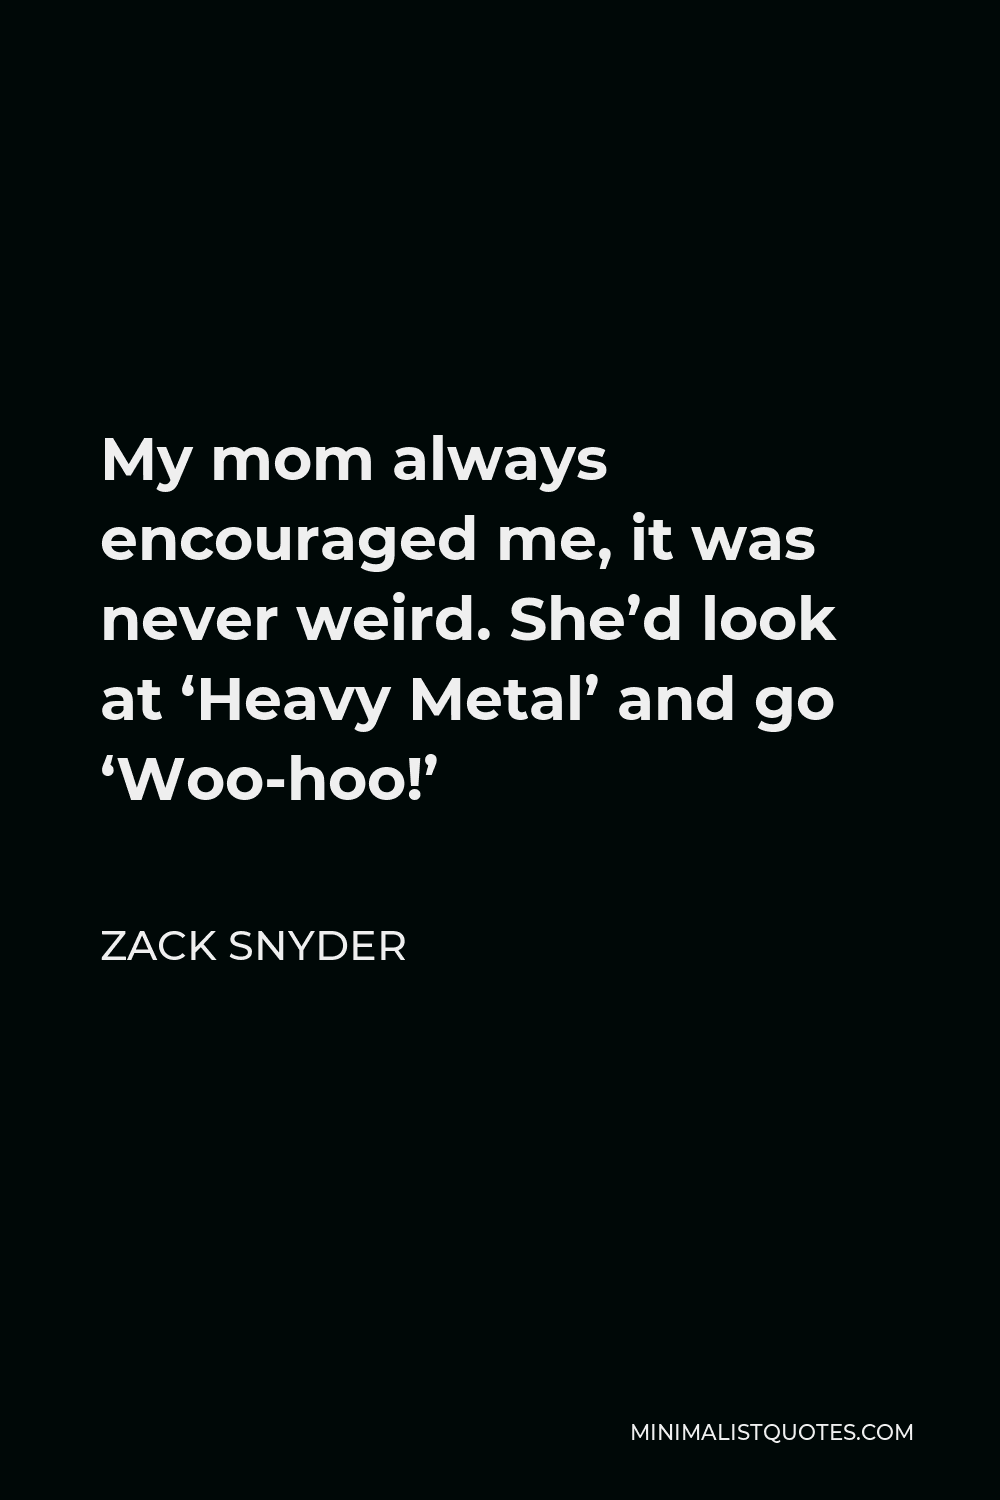 Zack Snyder Quote - My mom always encouraged me, it was never weird. She’d look at ‘Heavy Metal’ and go ‘Woo-hoo!’